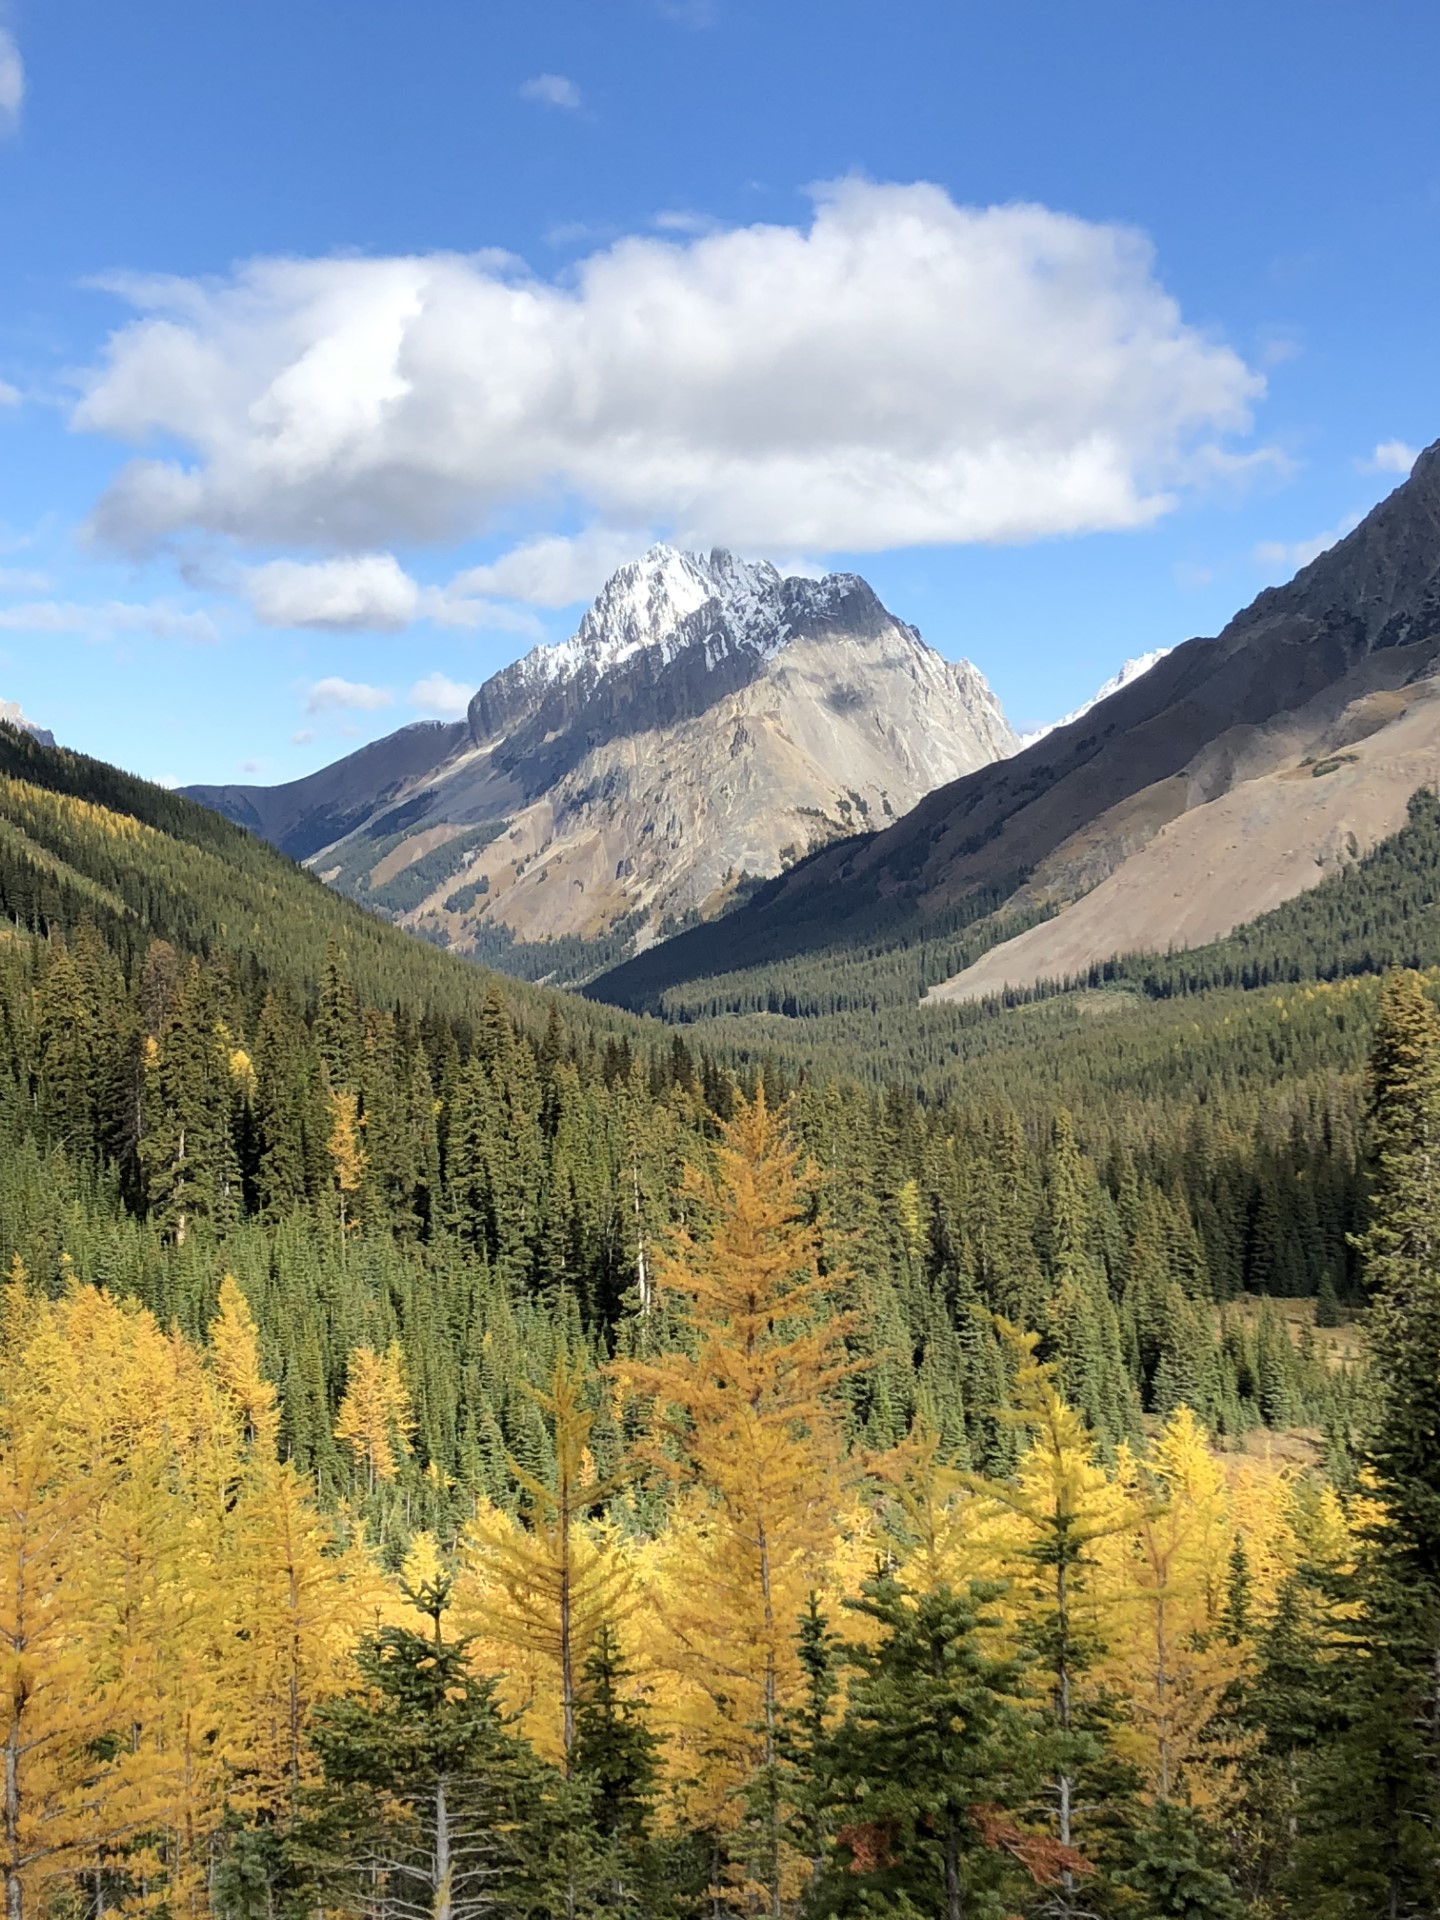 Larch trees of the Canadian Rocky Mountains - located in Kananaskis Country